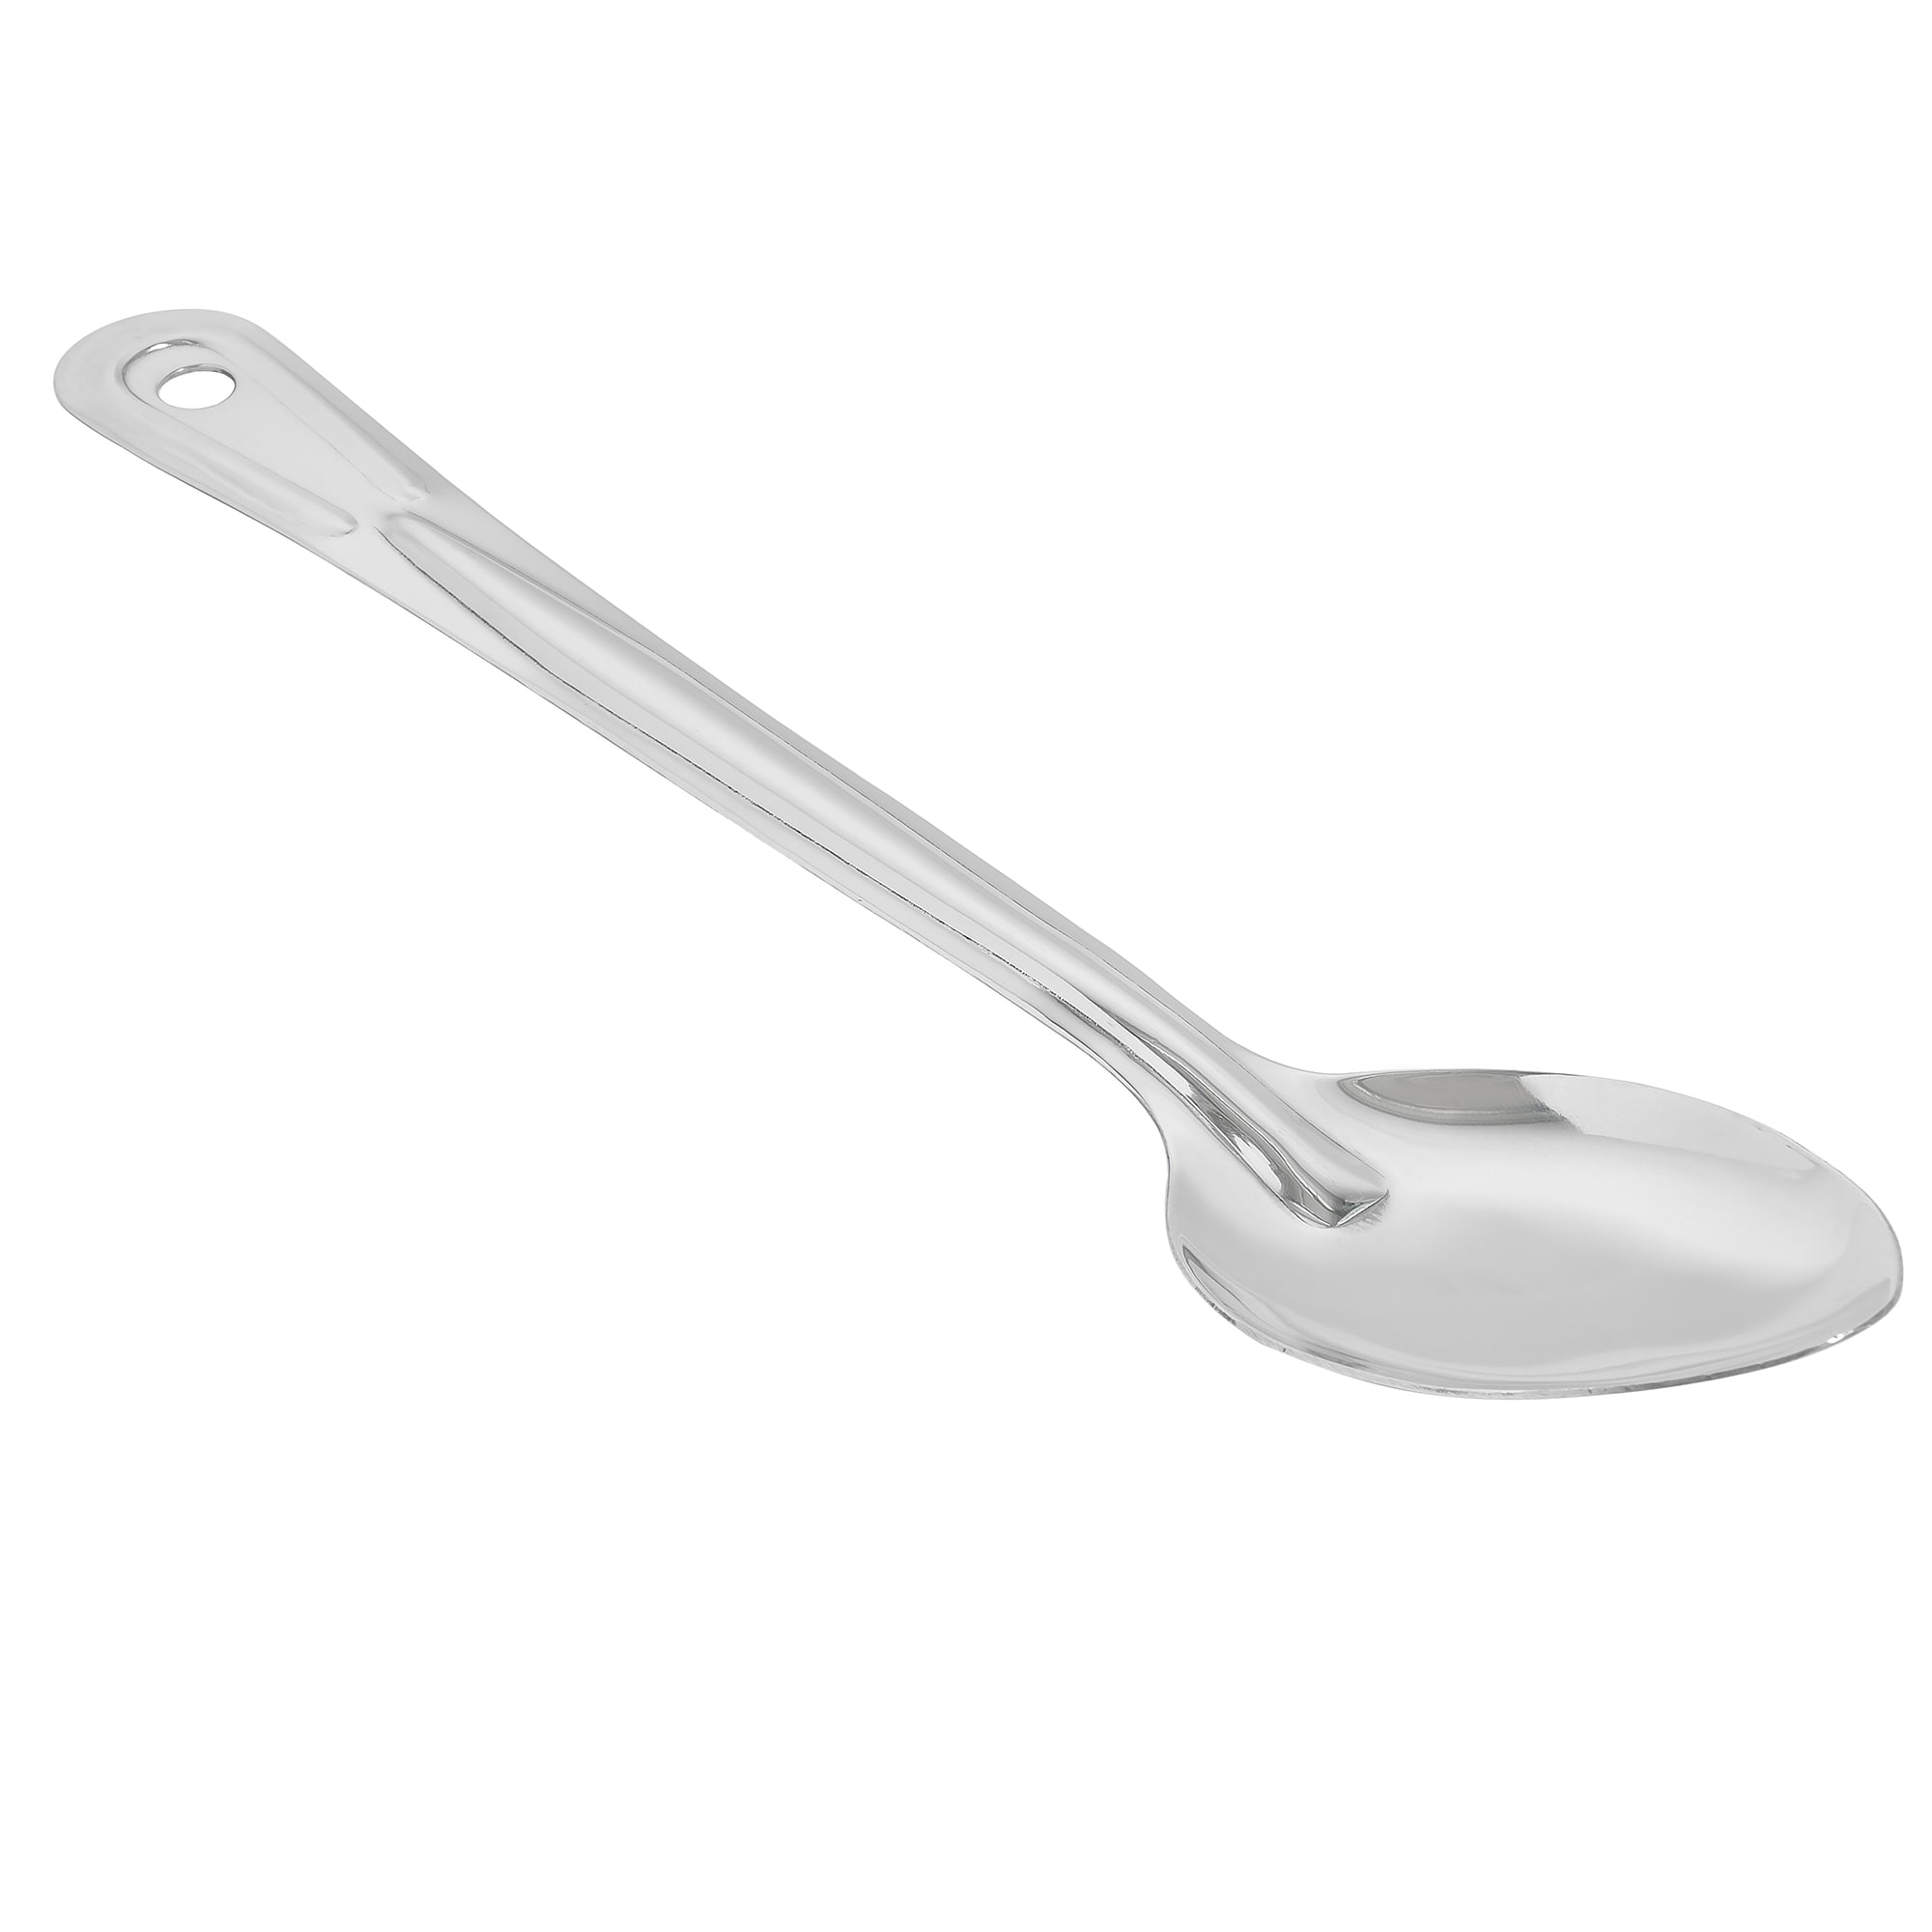  Winco Solid Stainless Steel Basting Spoon, 11-Inch: Cooking  Spoons: Home & Kitchen